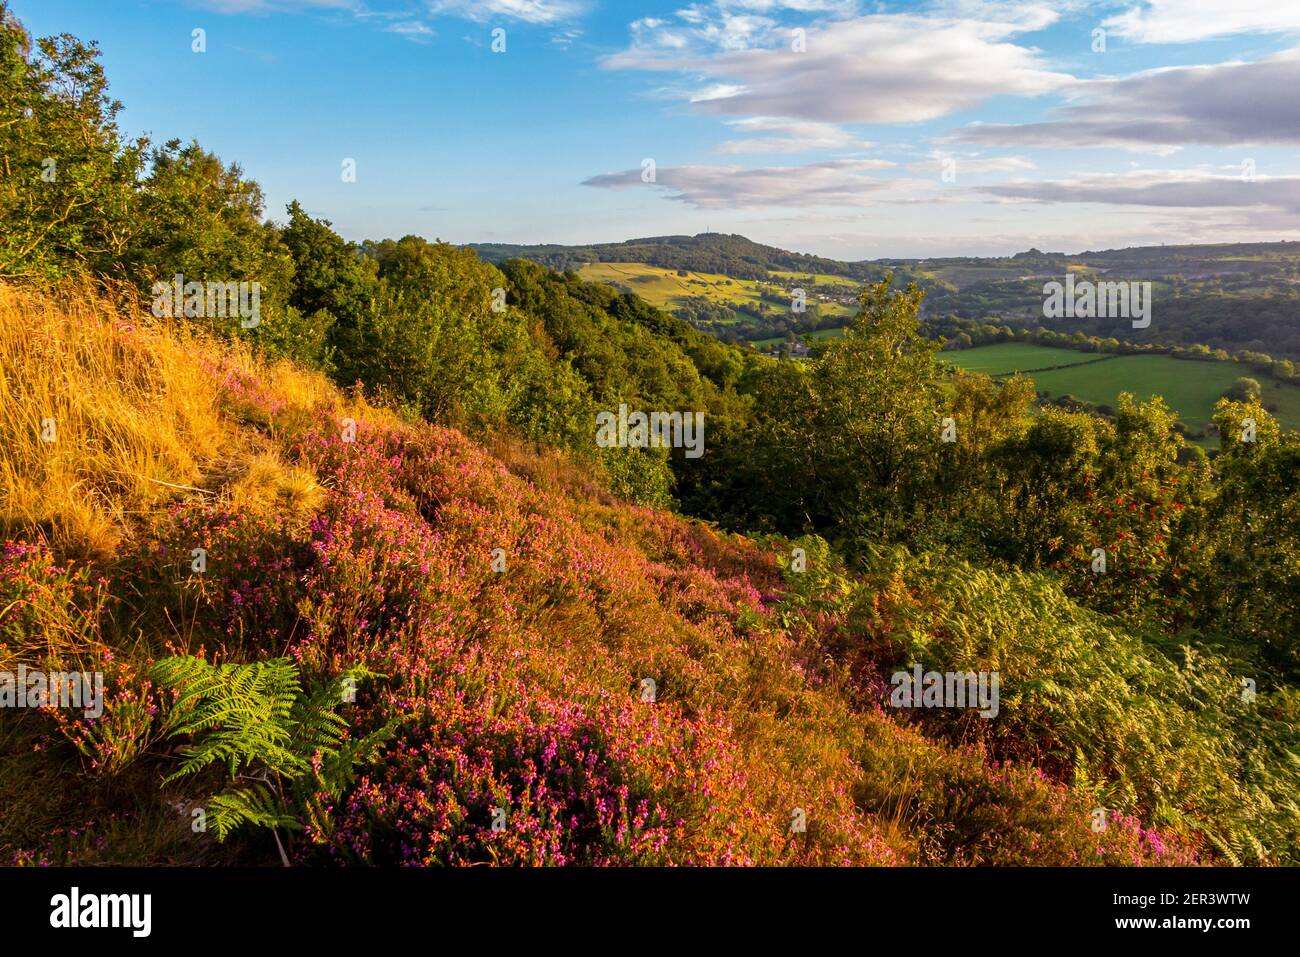 View over landscape at Starholmes near Matlock in the Derbyshire Dales Peak District England UK with trees in late summer colour. Stock Photo